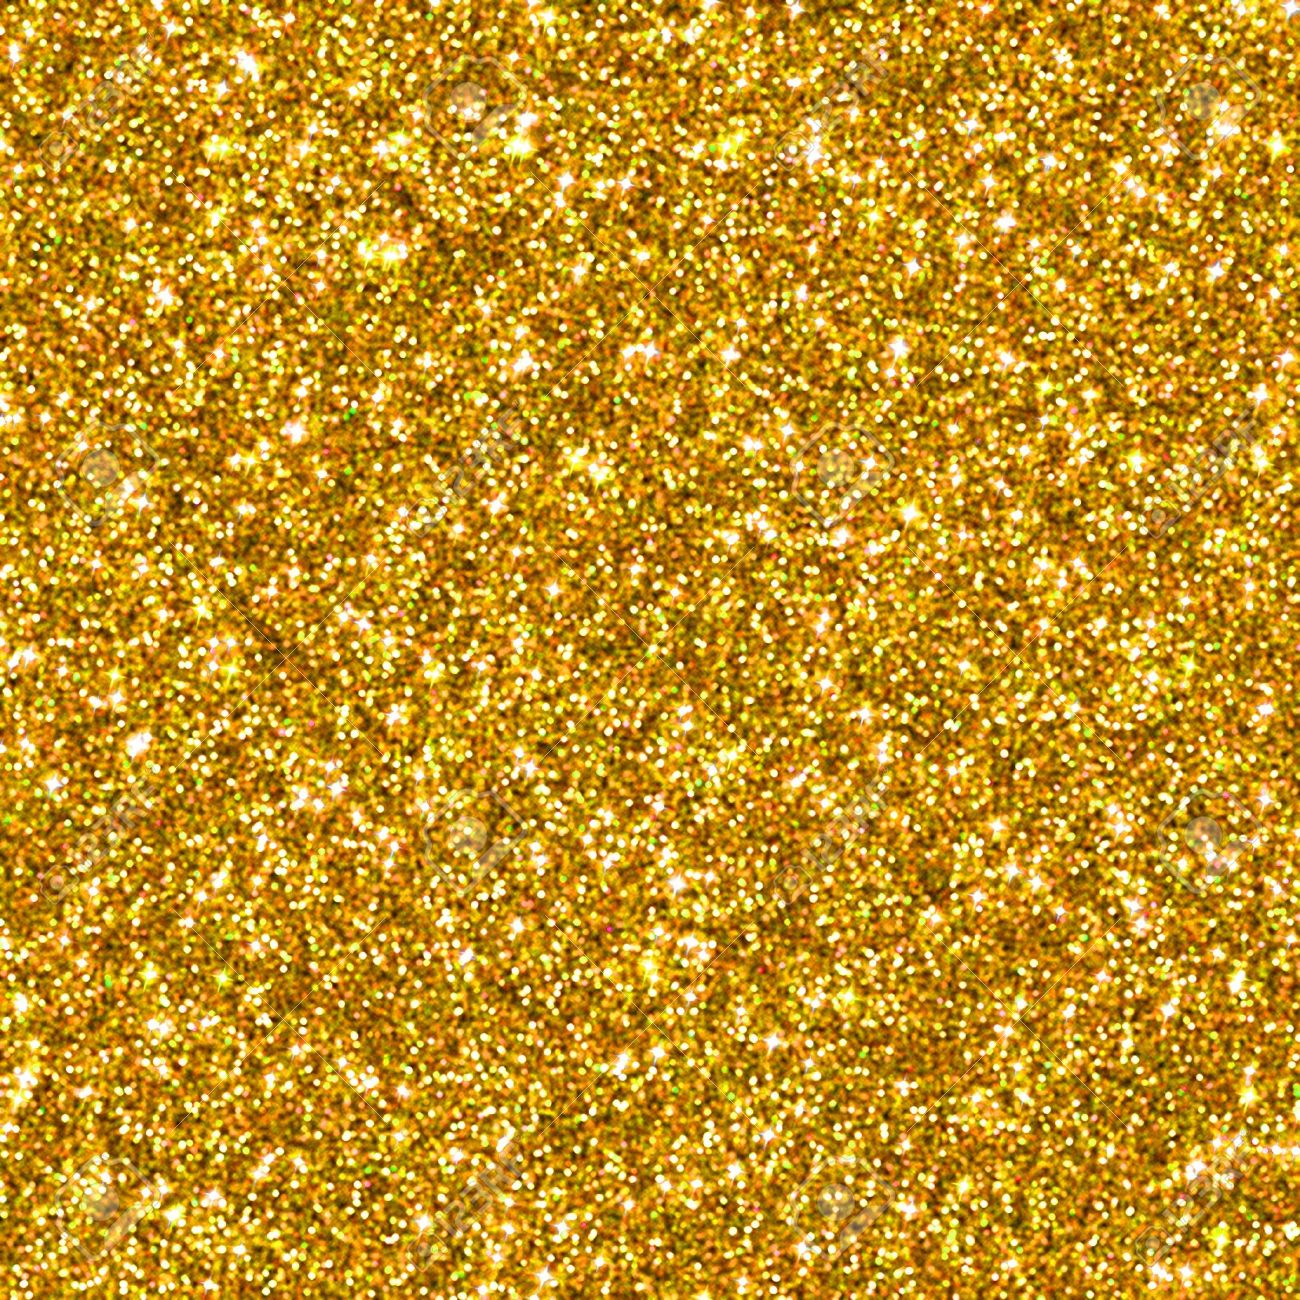 Golden Glitter For Texture Or Background Stock Photo Picture And